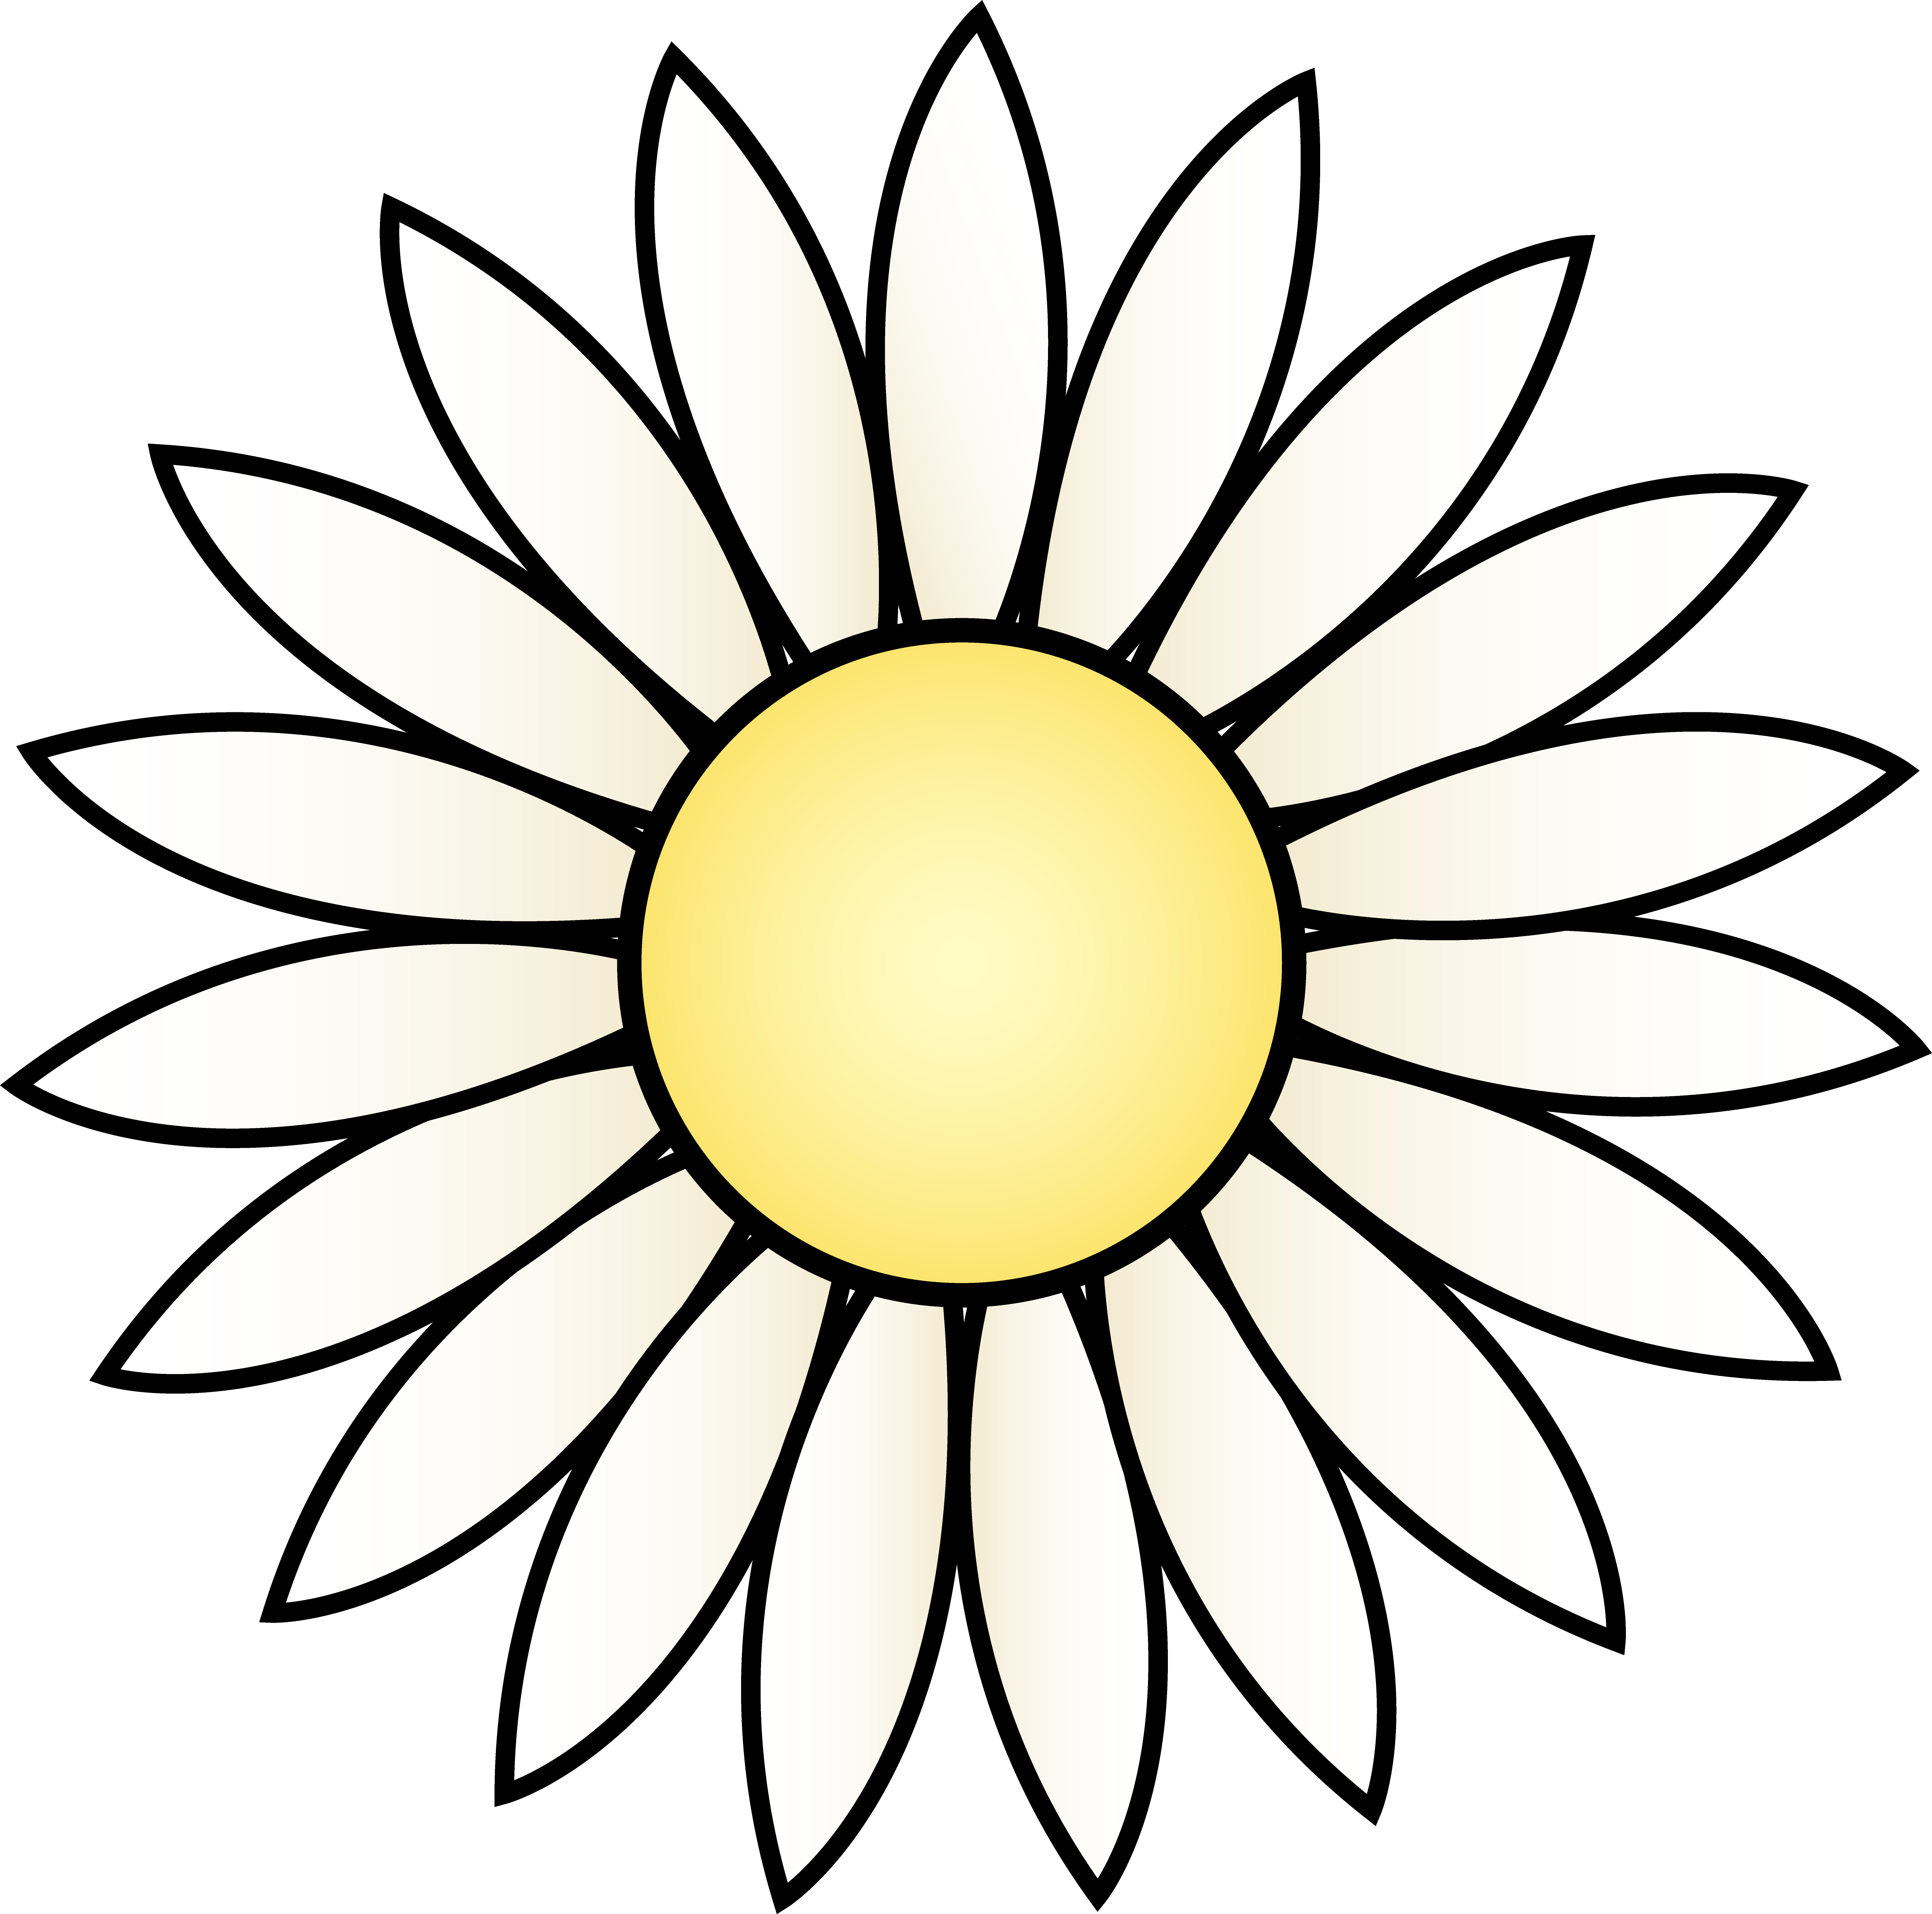 Daisy clip art free free clipart images 3